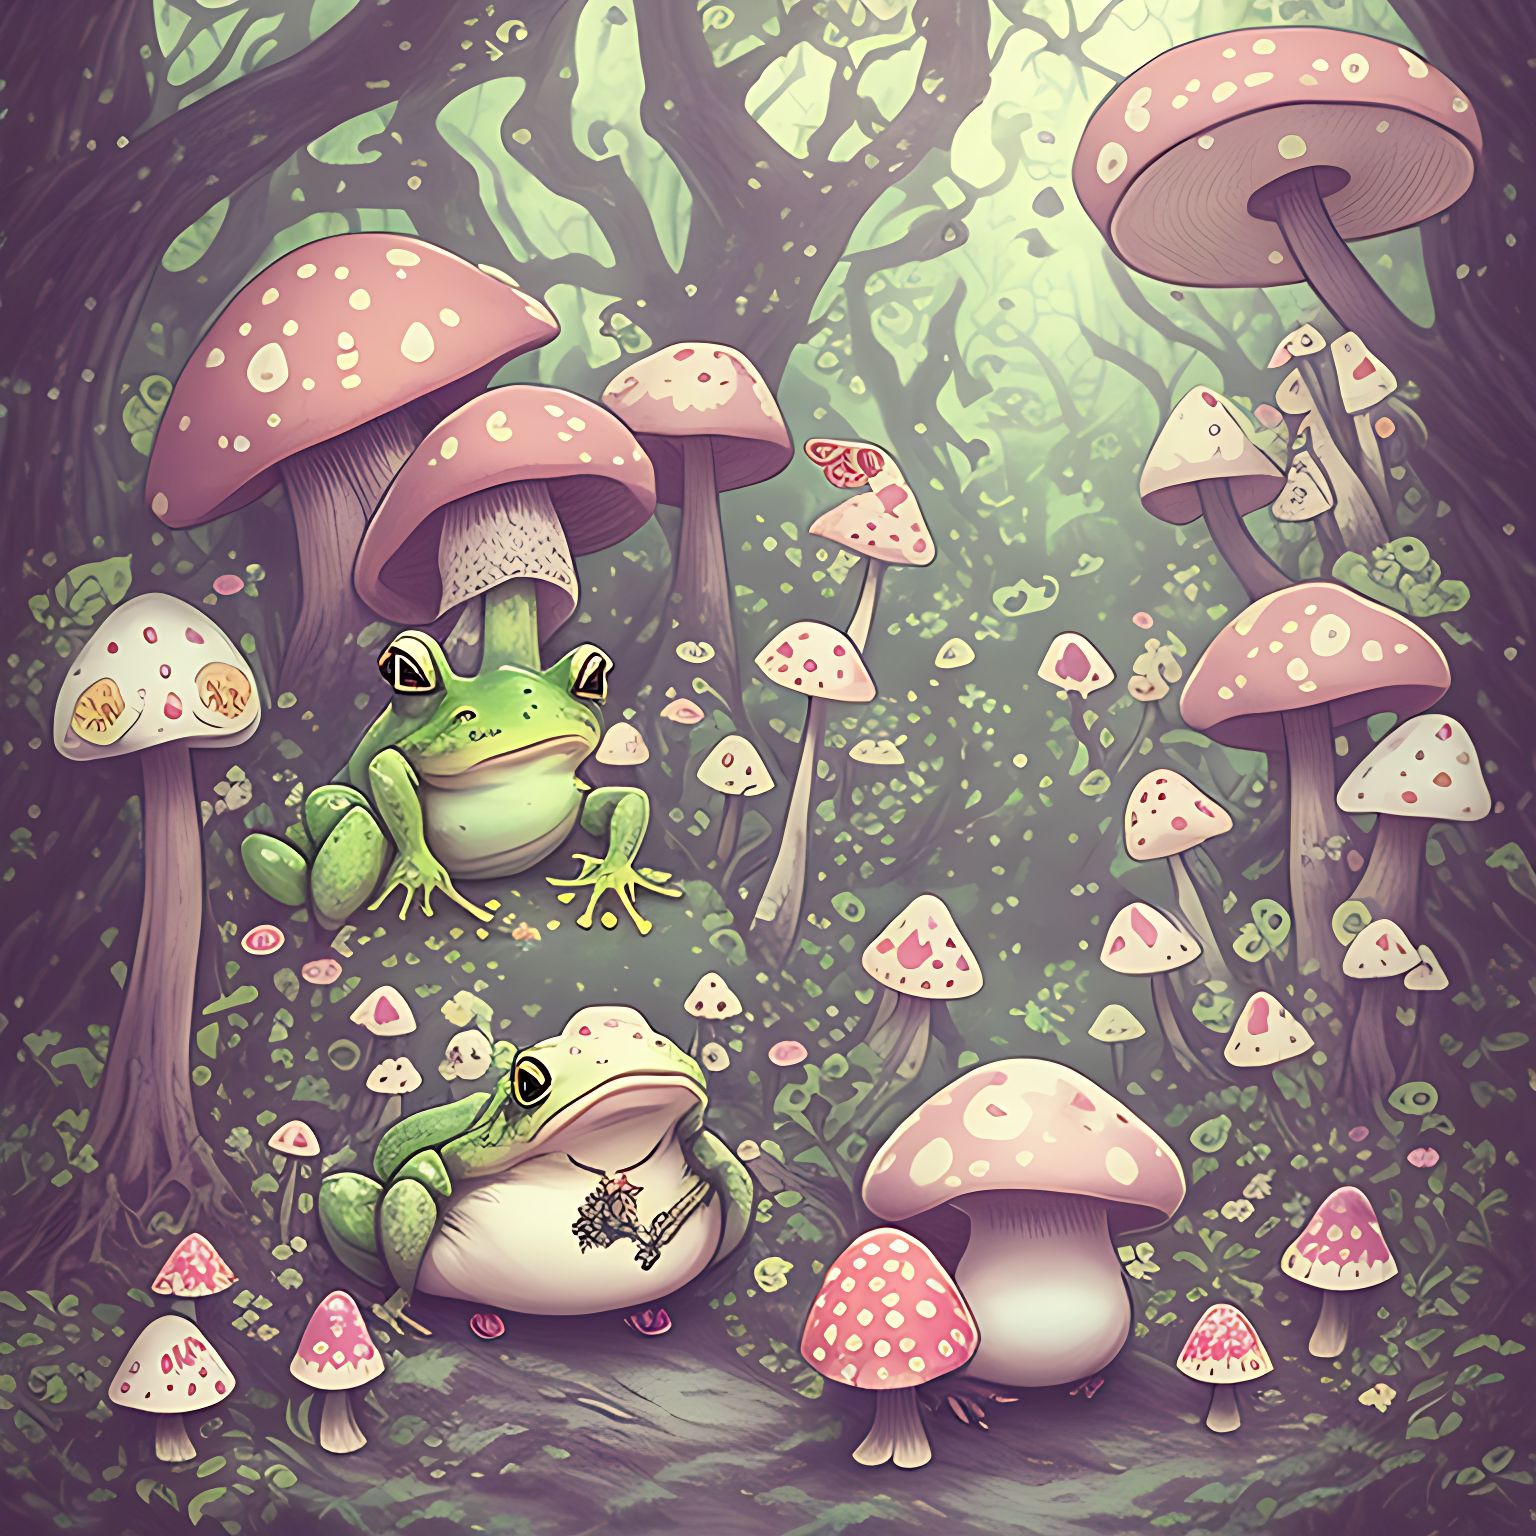 Illustration, a magic frog with a witch hat in the woods with mushrooms, Kawaii art,, Japanese, Kawaii art